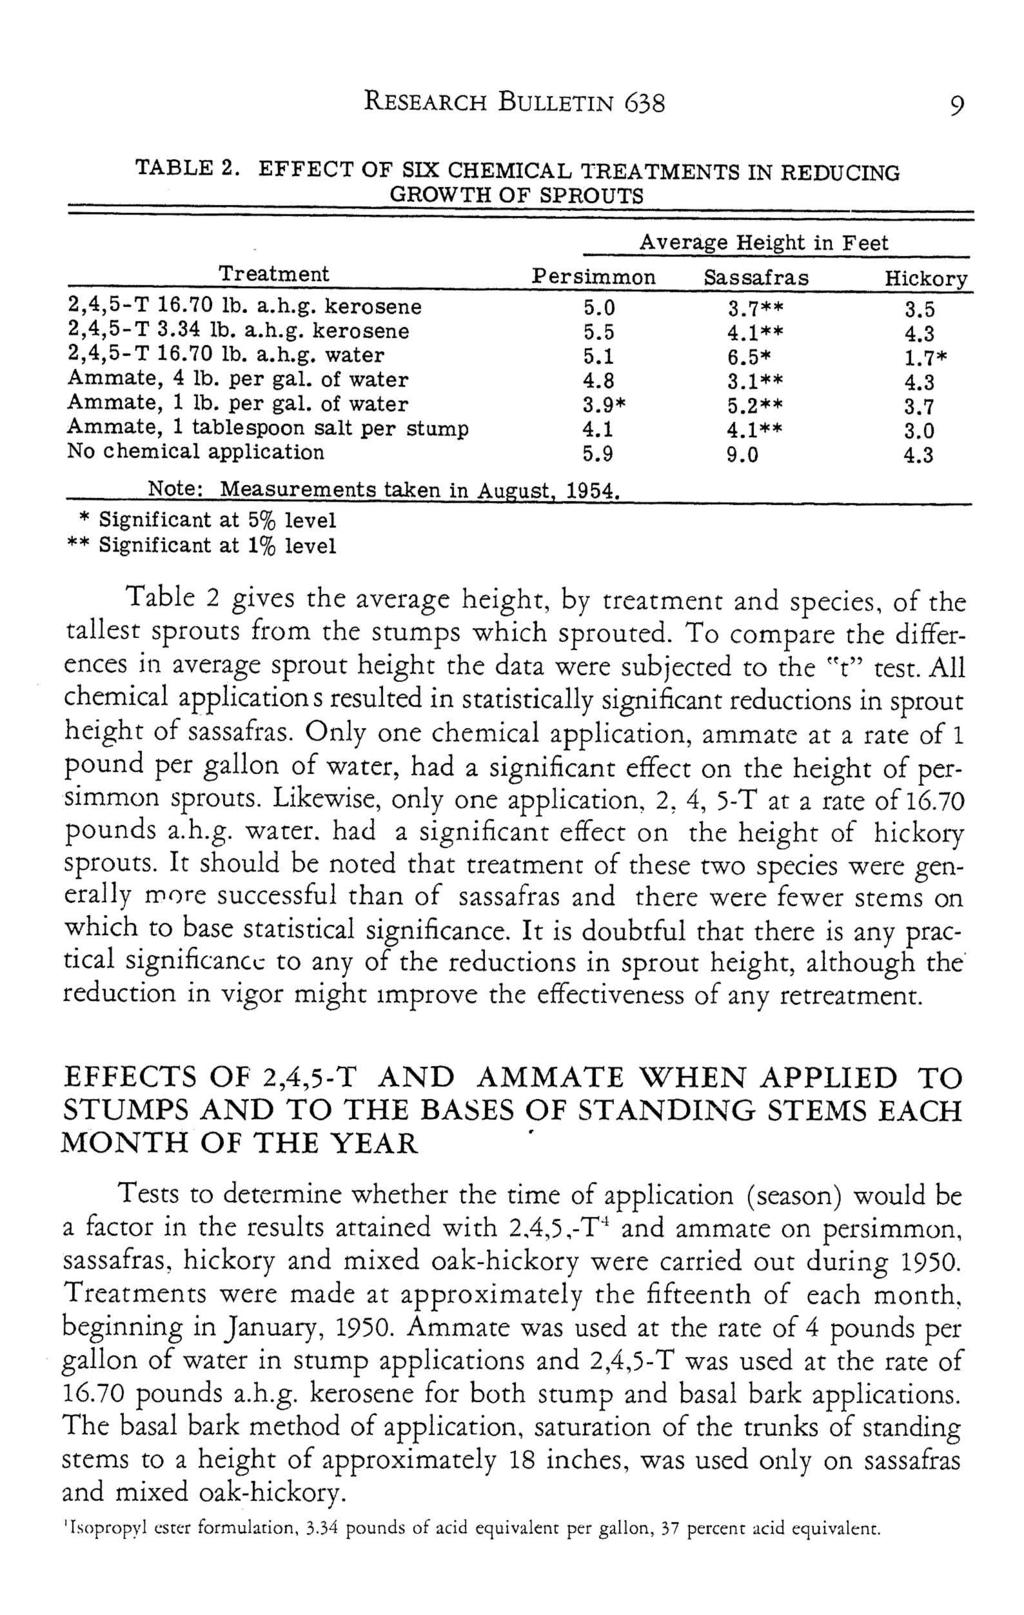 RESEARCH BULLETIN 638 9 TABLE 2. EFFECT OF SIX CHEMICAL TREATMENTS IN REDUCING GROWTH OF SPROUTS Average Height in Feet Treatment Persimmon Sassafras Hickory 2,4,5-T 16. 70 lb. a.h.g. kerosene 2,4,5-T 3.